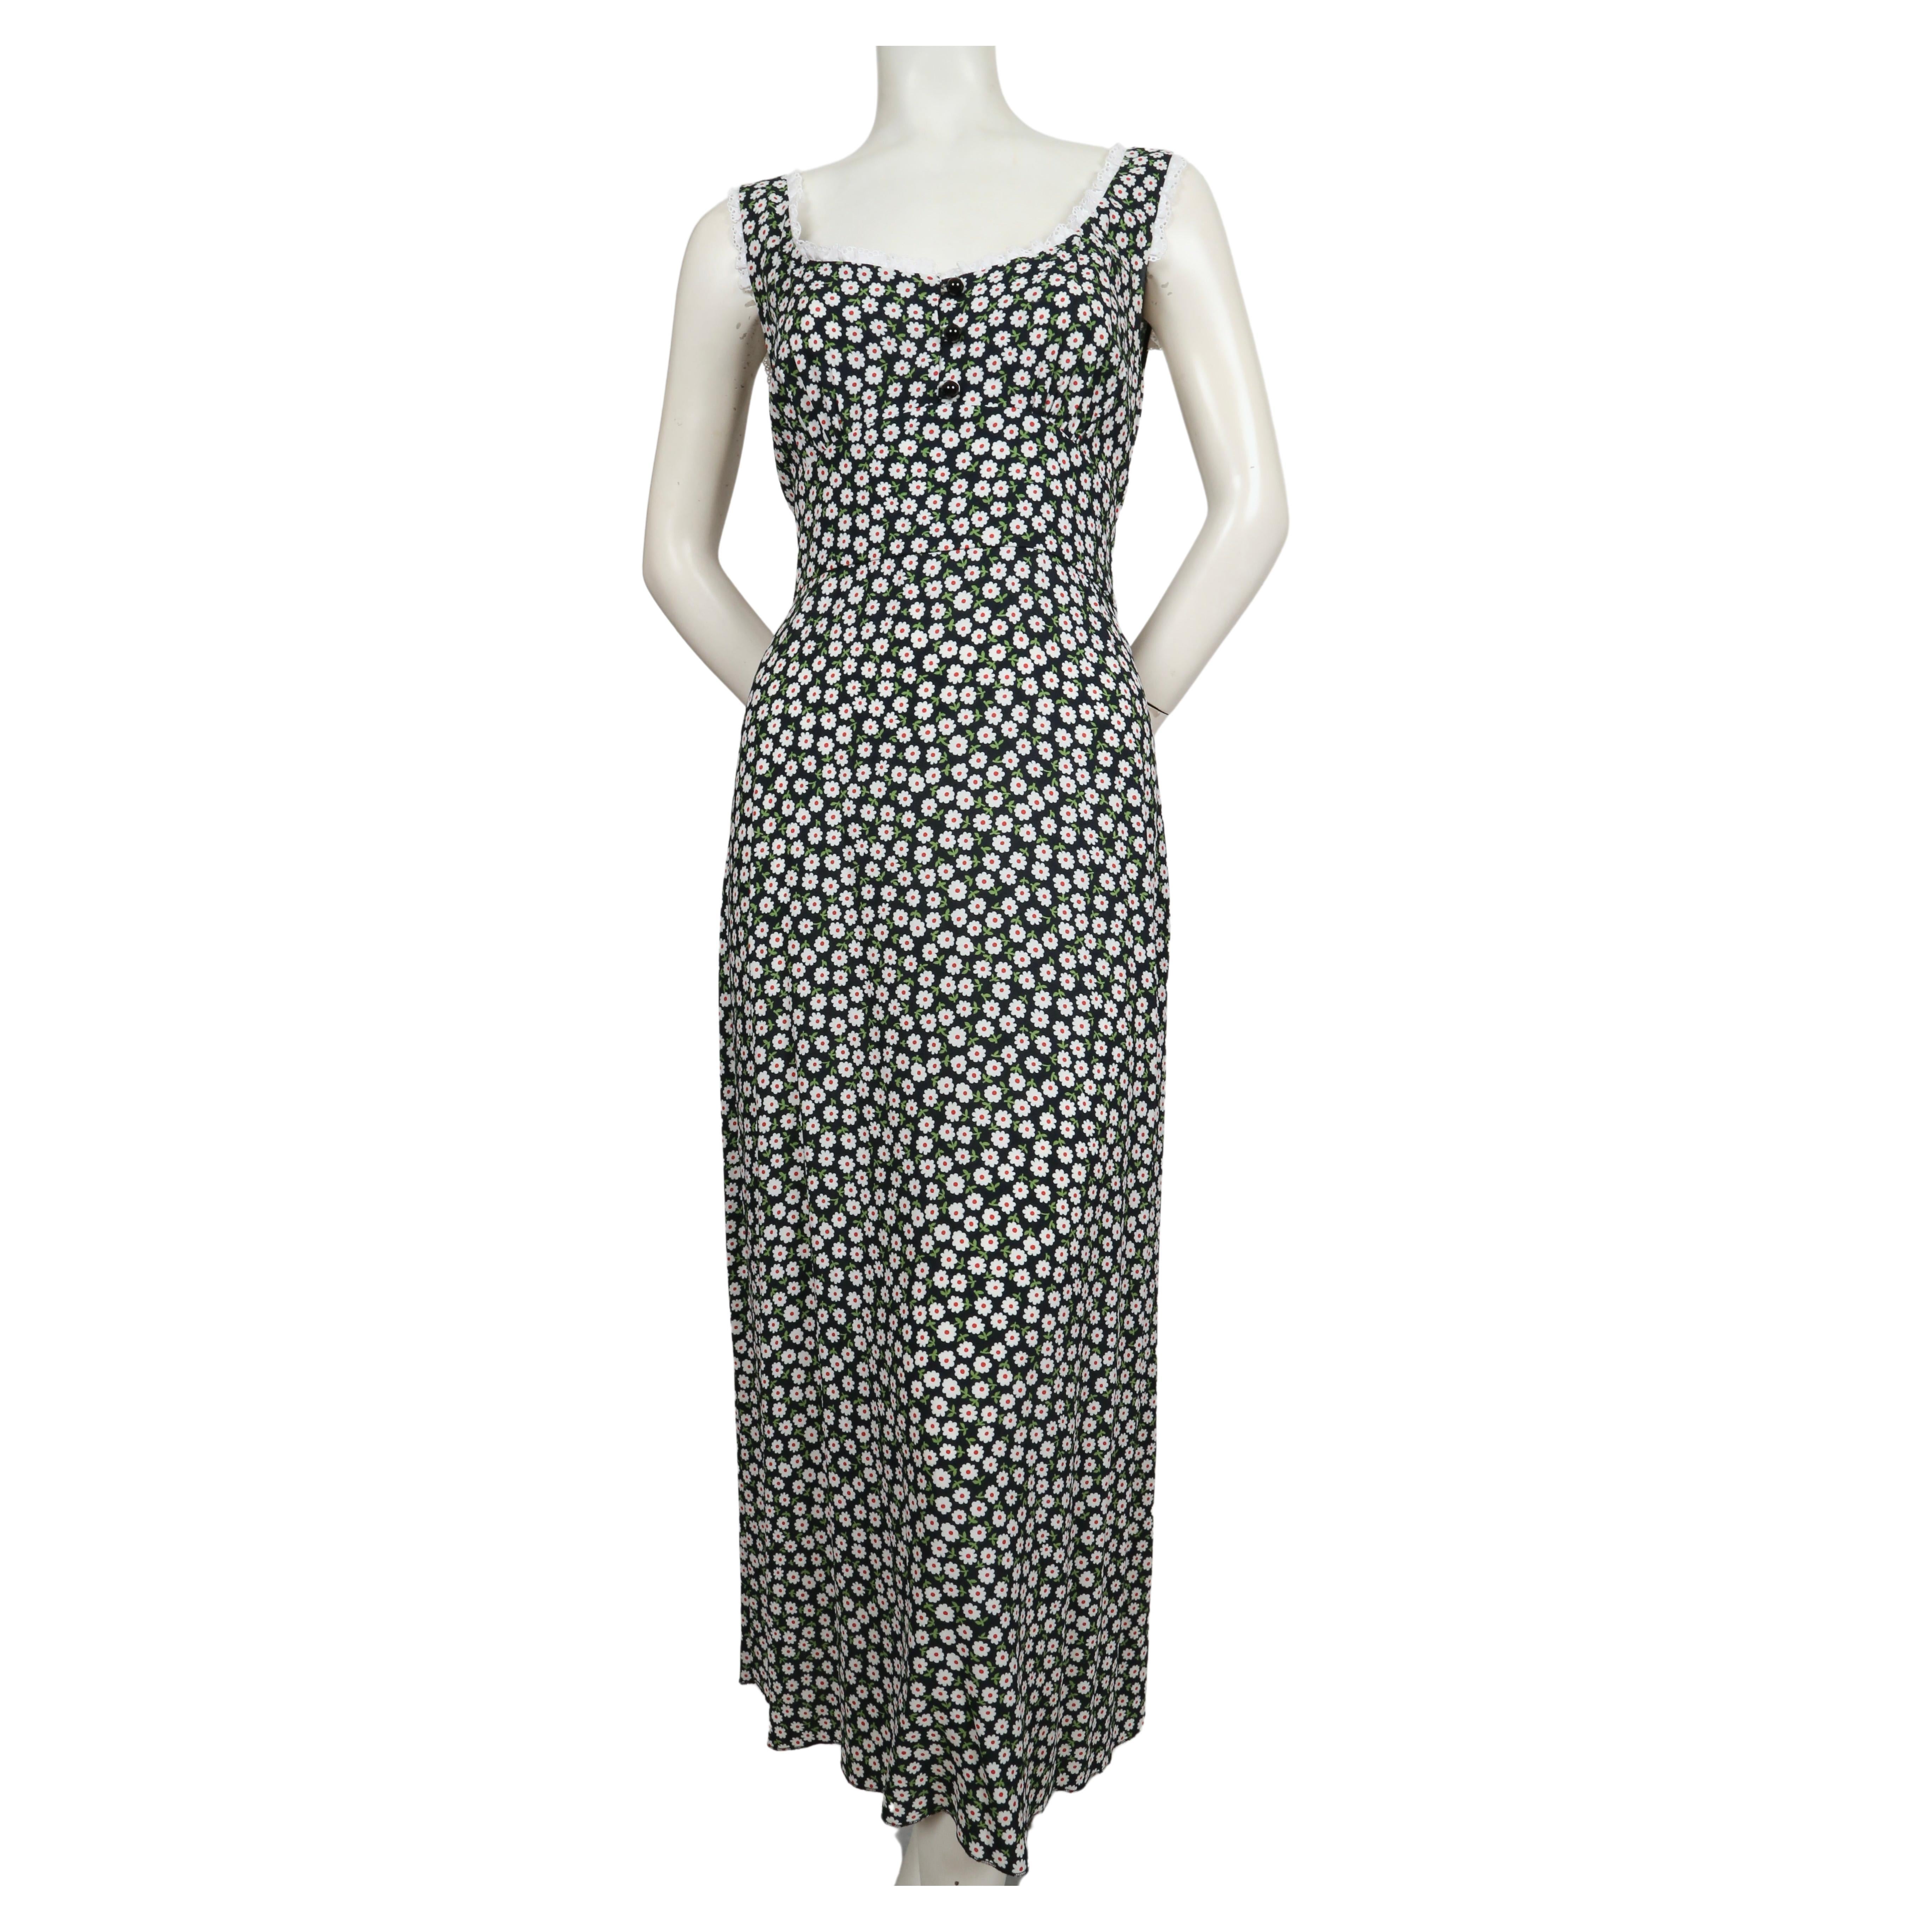 Floral printed viscose crepe dress with white Broderie Anglaise lace trim and button front designed by Muccia Prada for Miu Miu. Deepest navy blue background. Size 42 Approximate measurements: bust 36